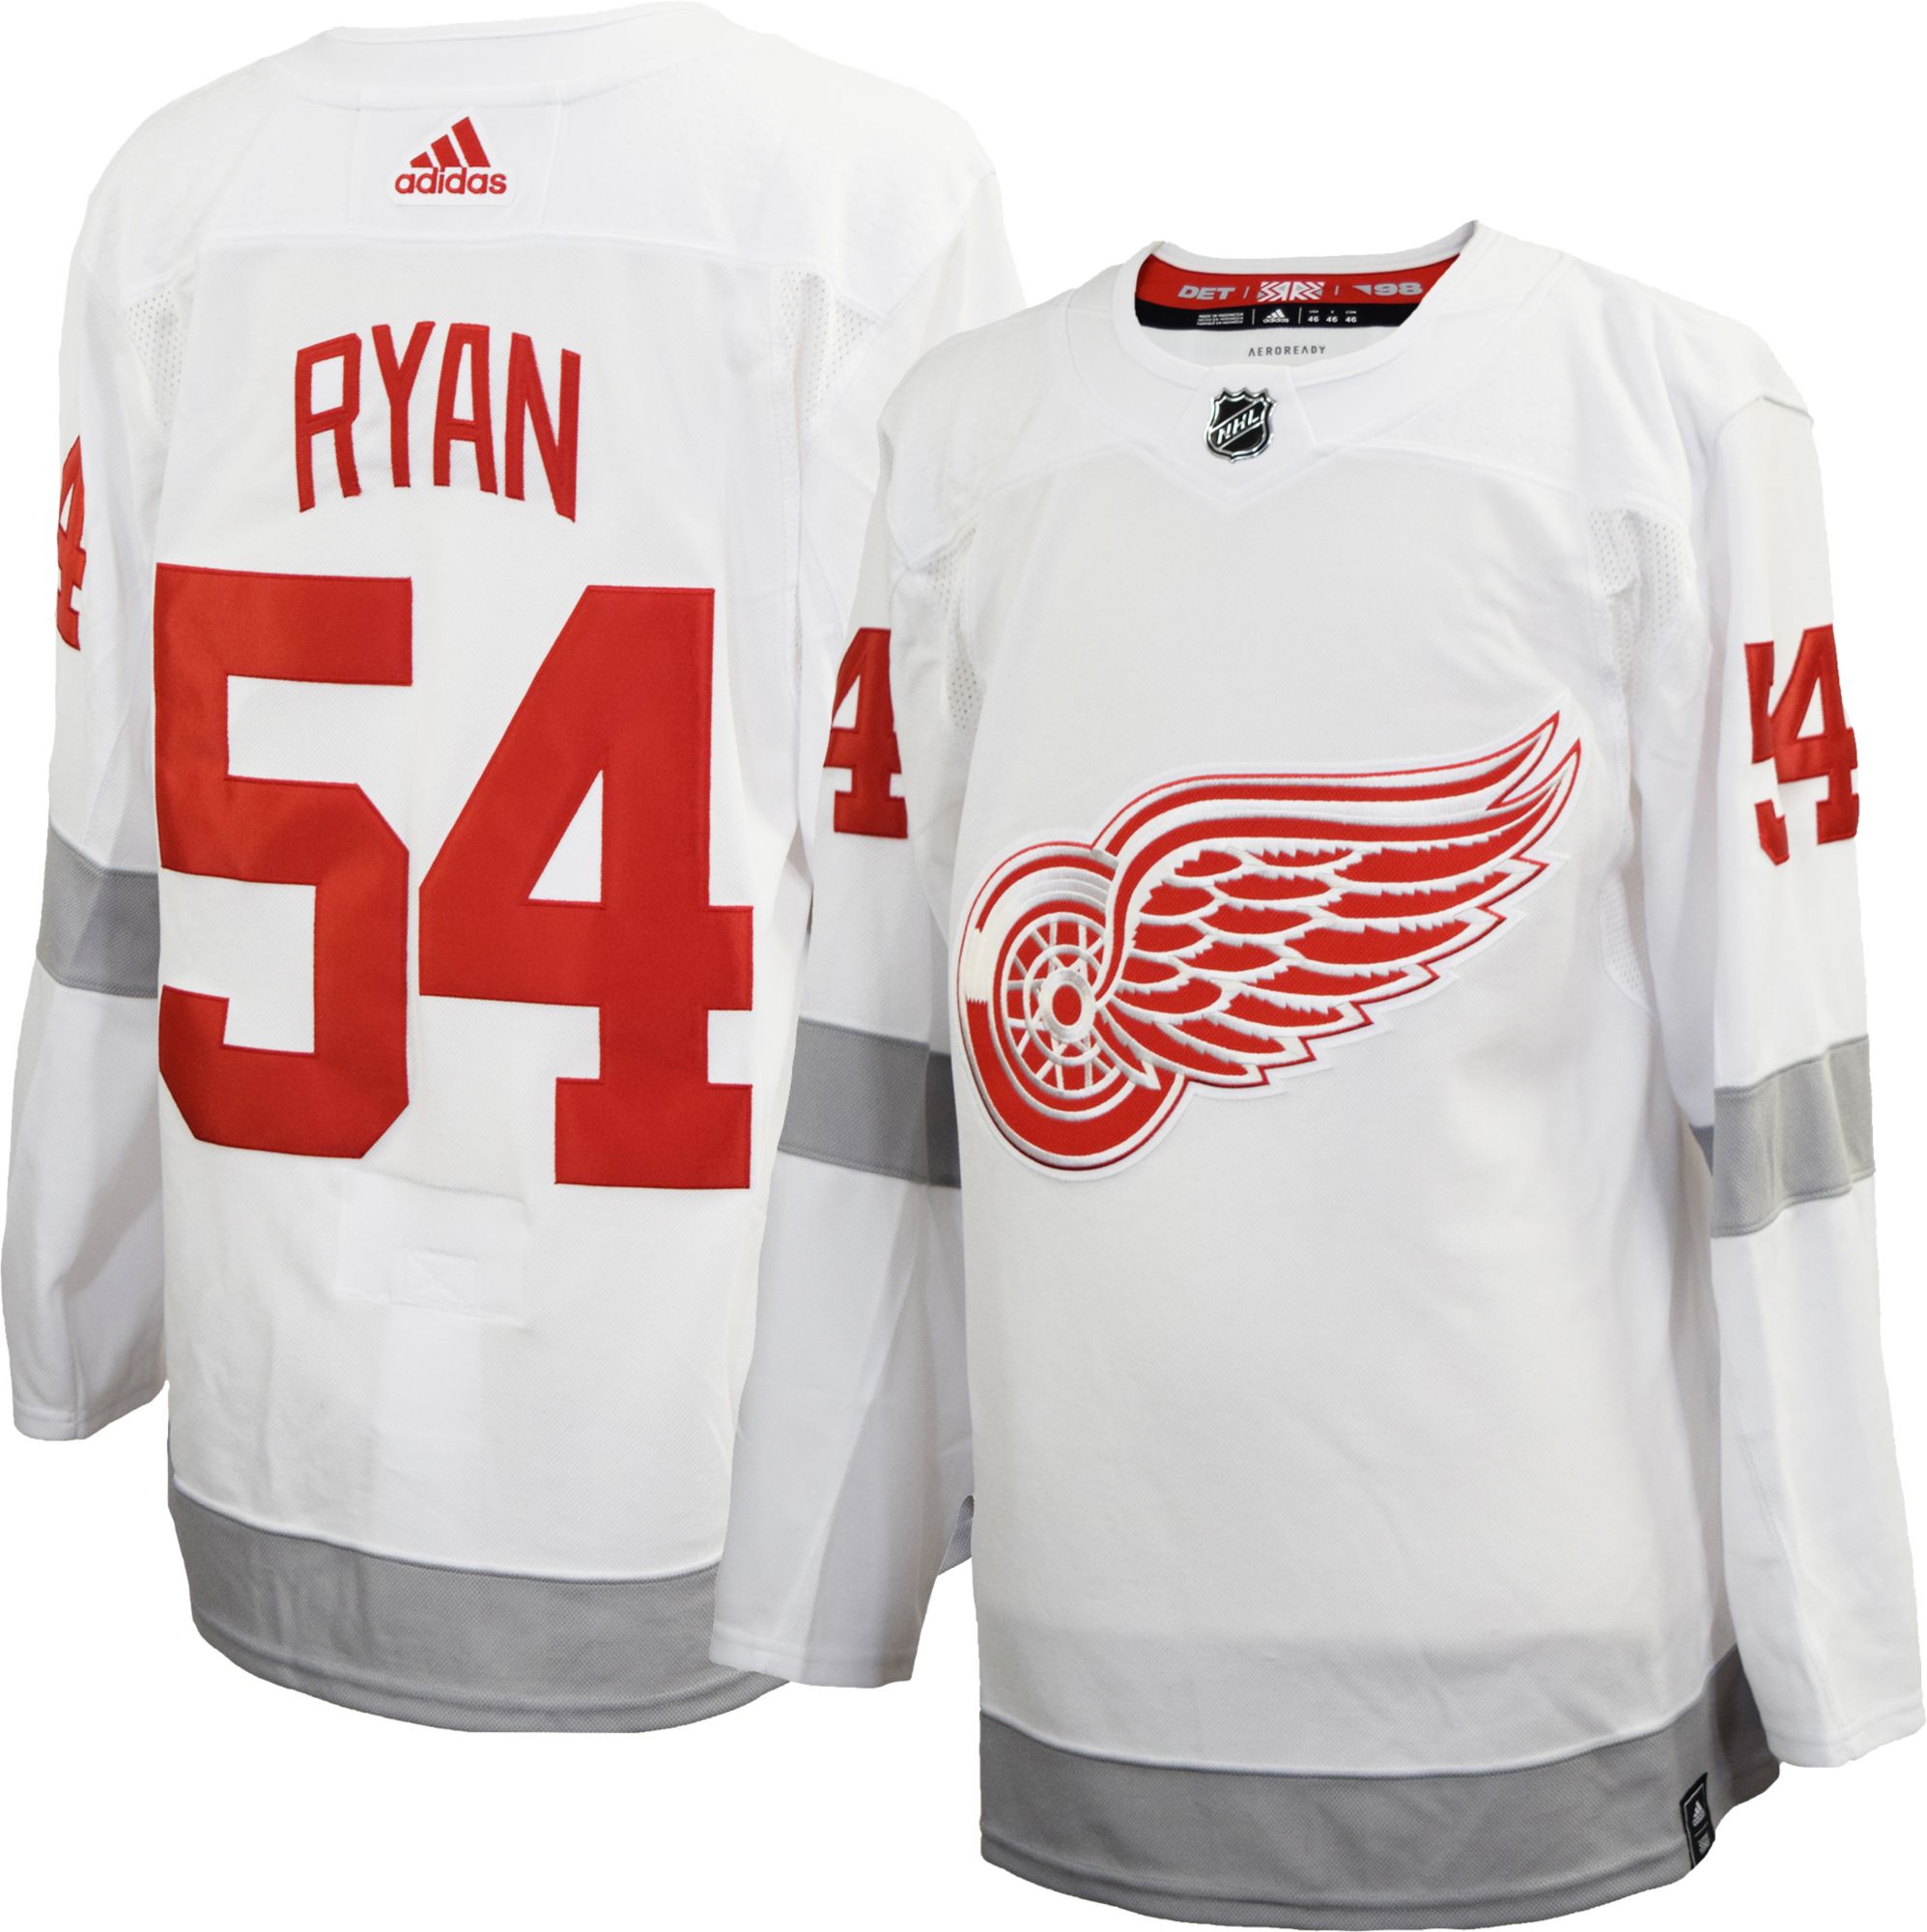 Men's Detroit Red Wings adidas White Reverse Retro Pullover Hoodie